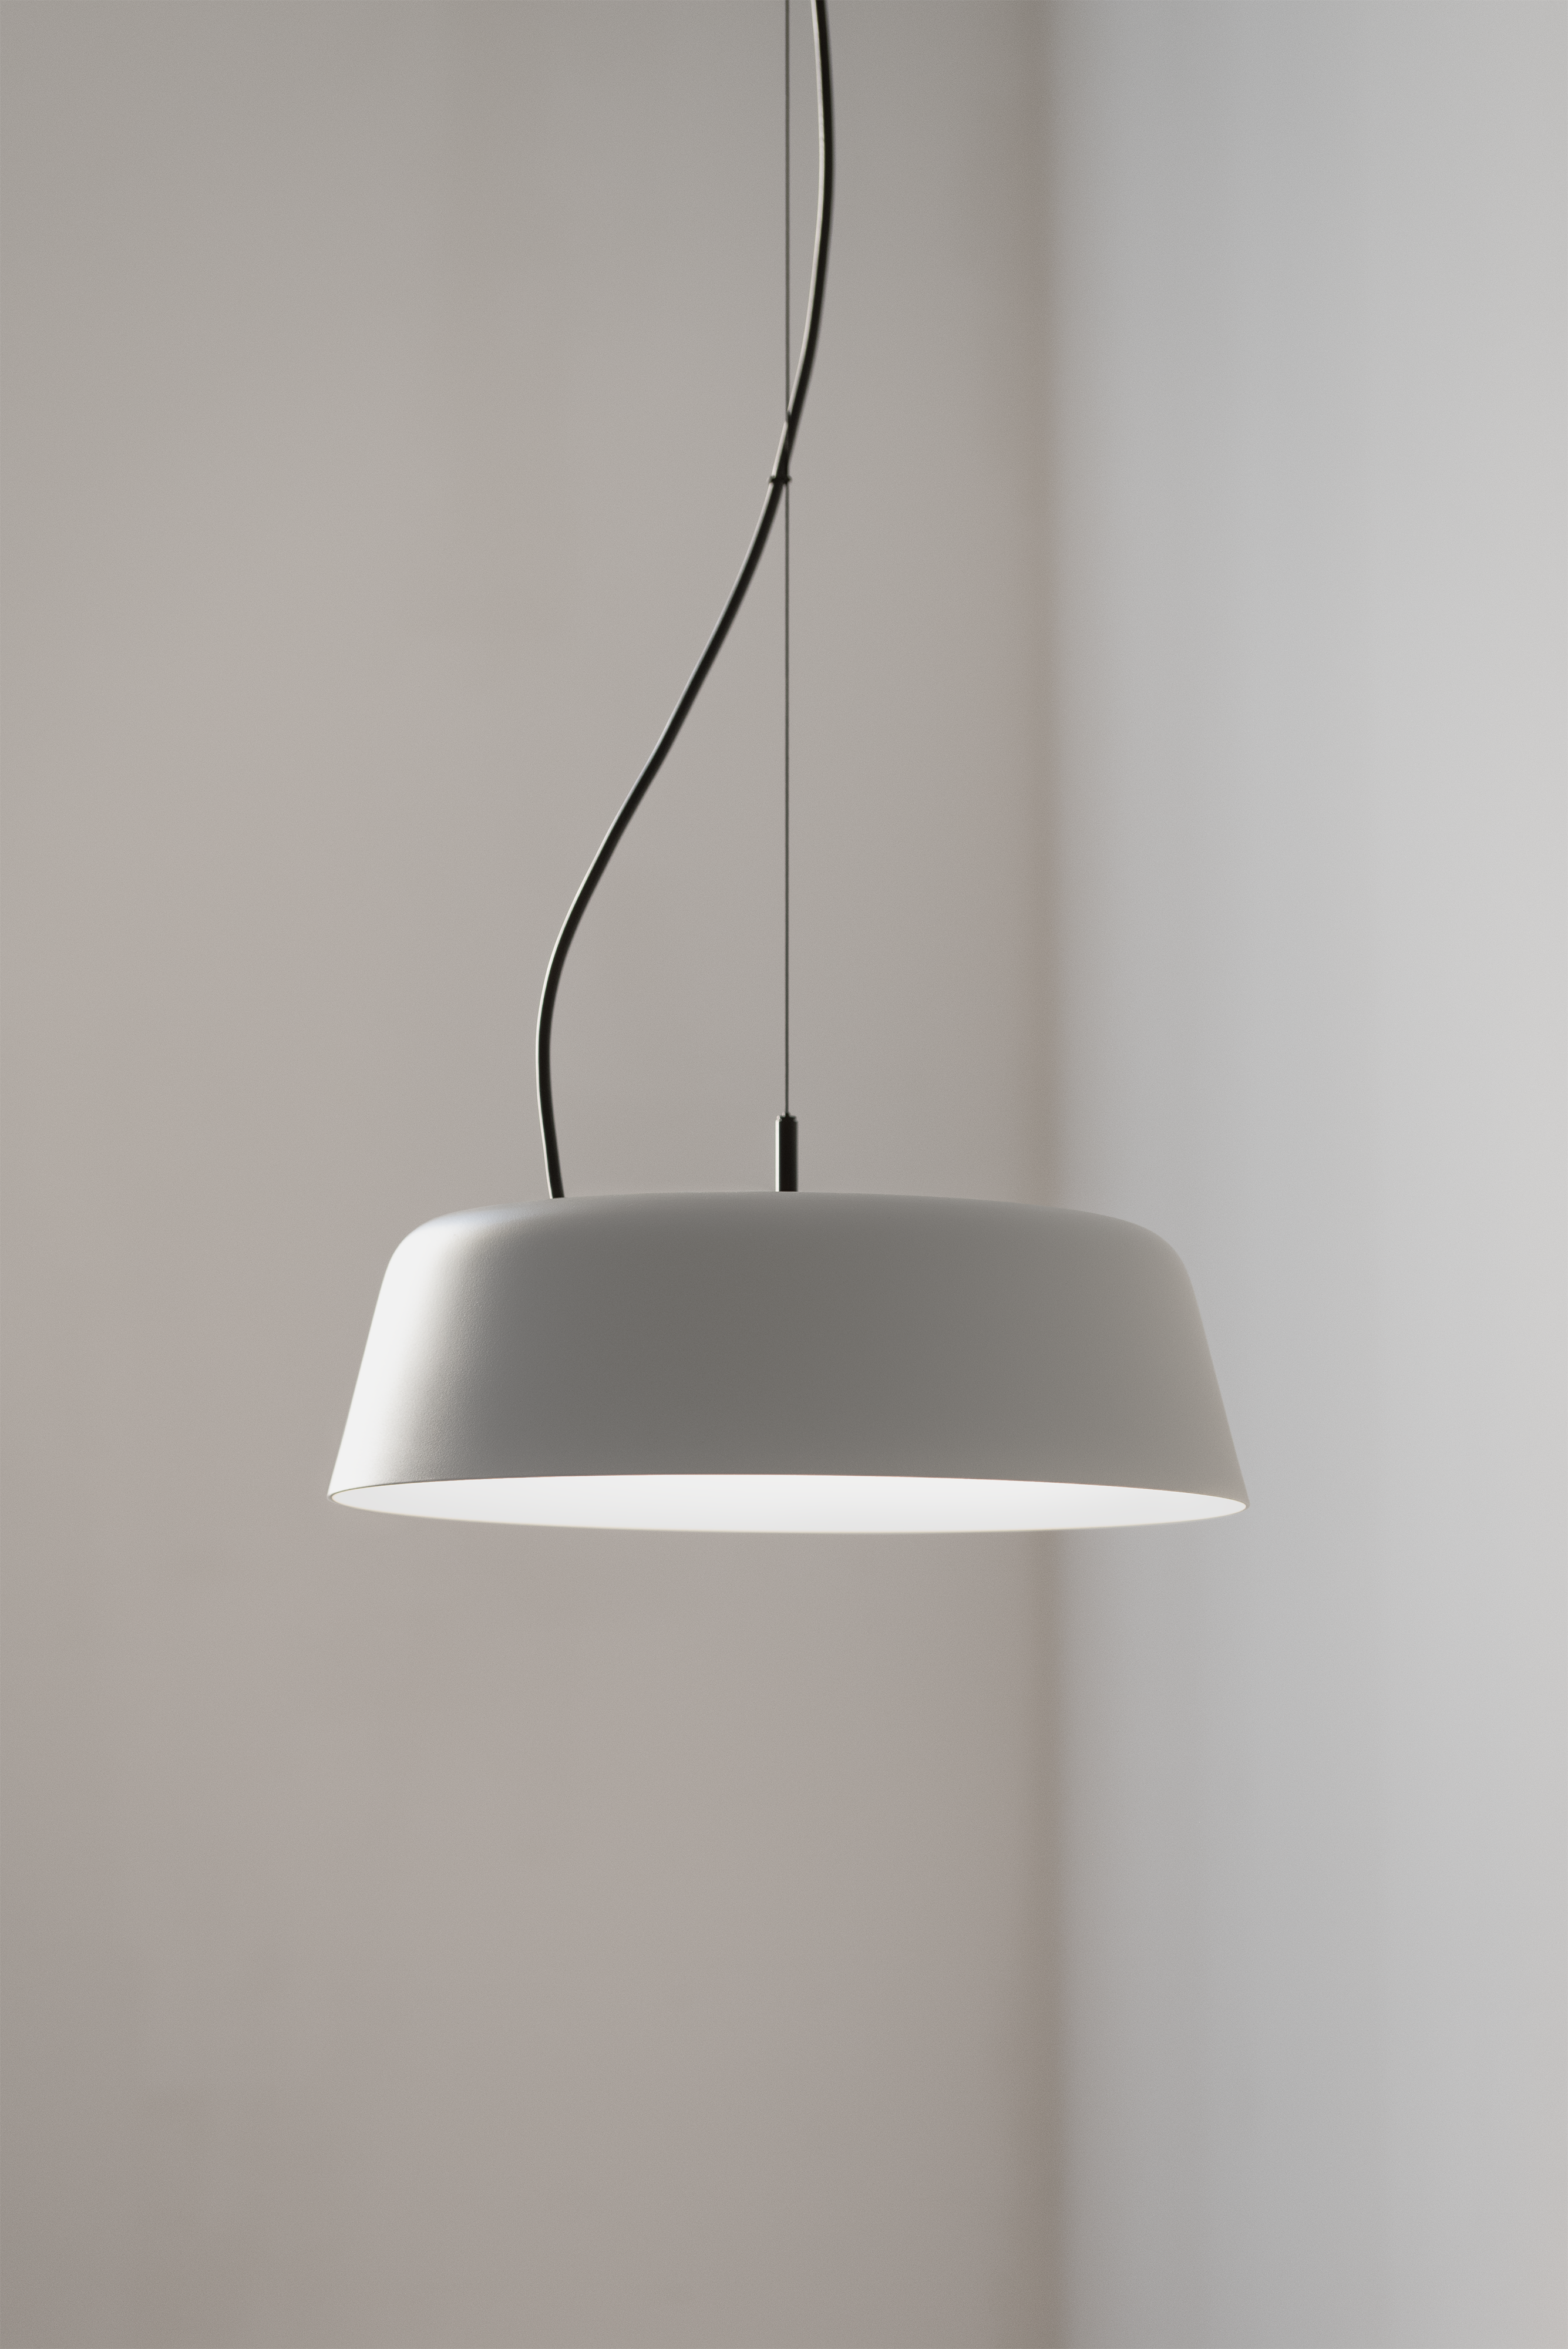 Bowl LED pendant lamp, in light-grey matt powder-coated metal, with black cable and wire rope.